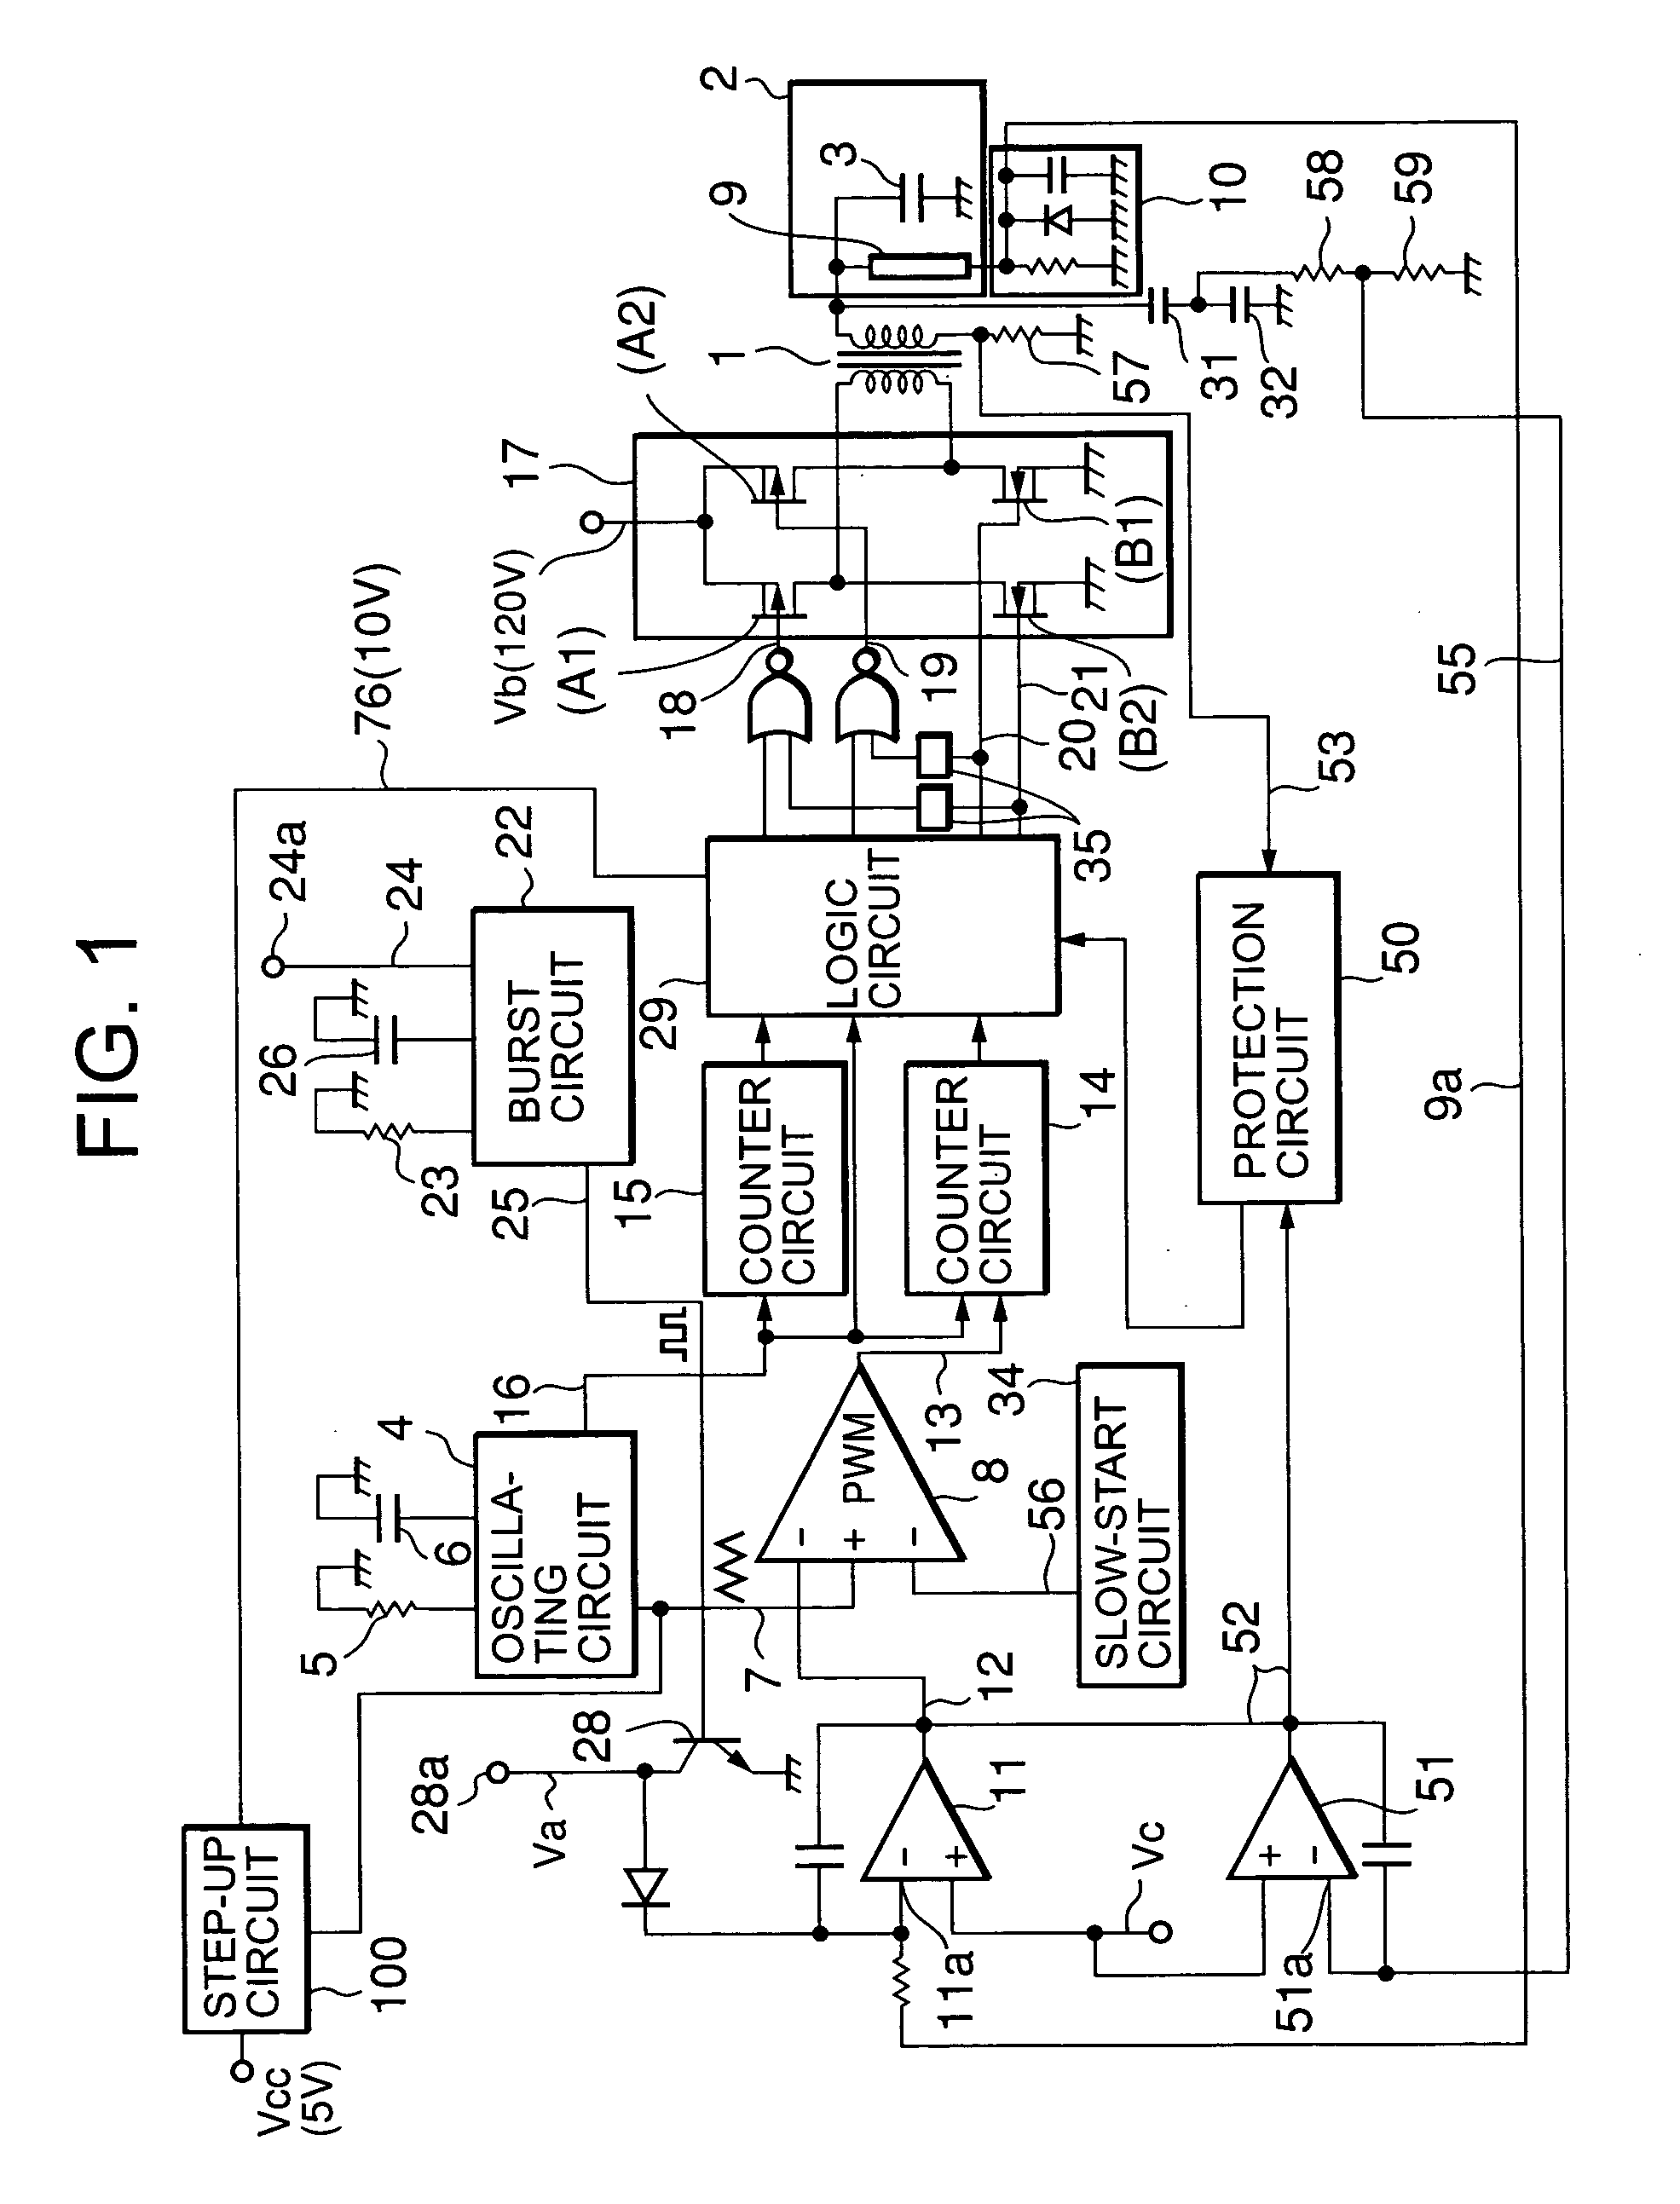 Inverter circuit for lighting discharge lamps with reduced power consumption